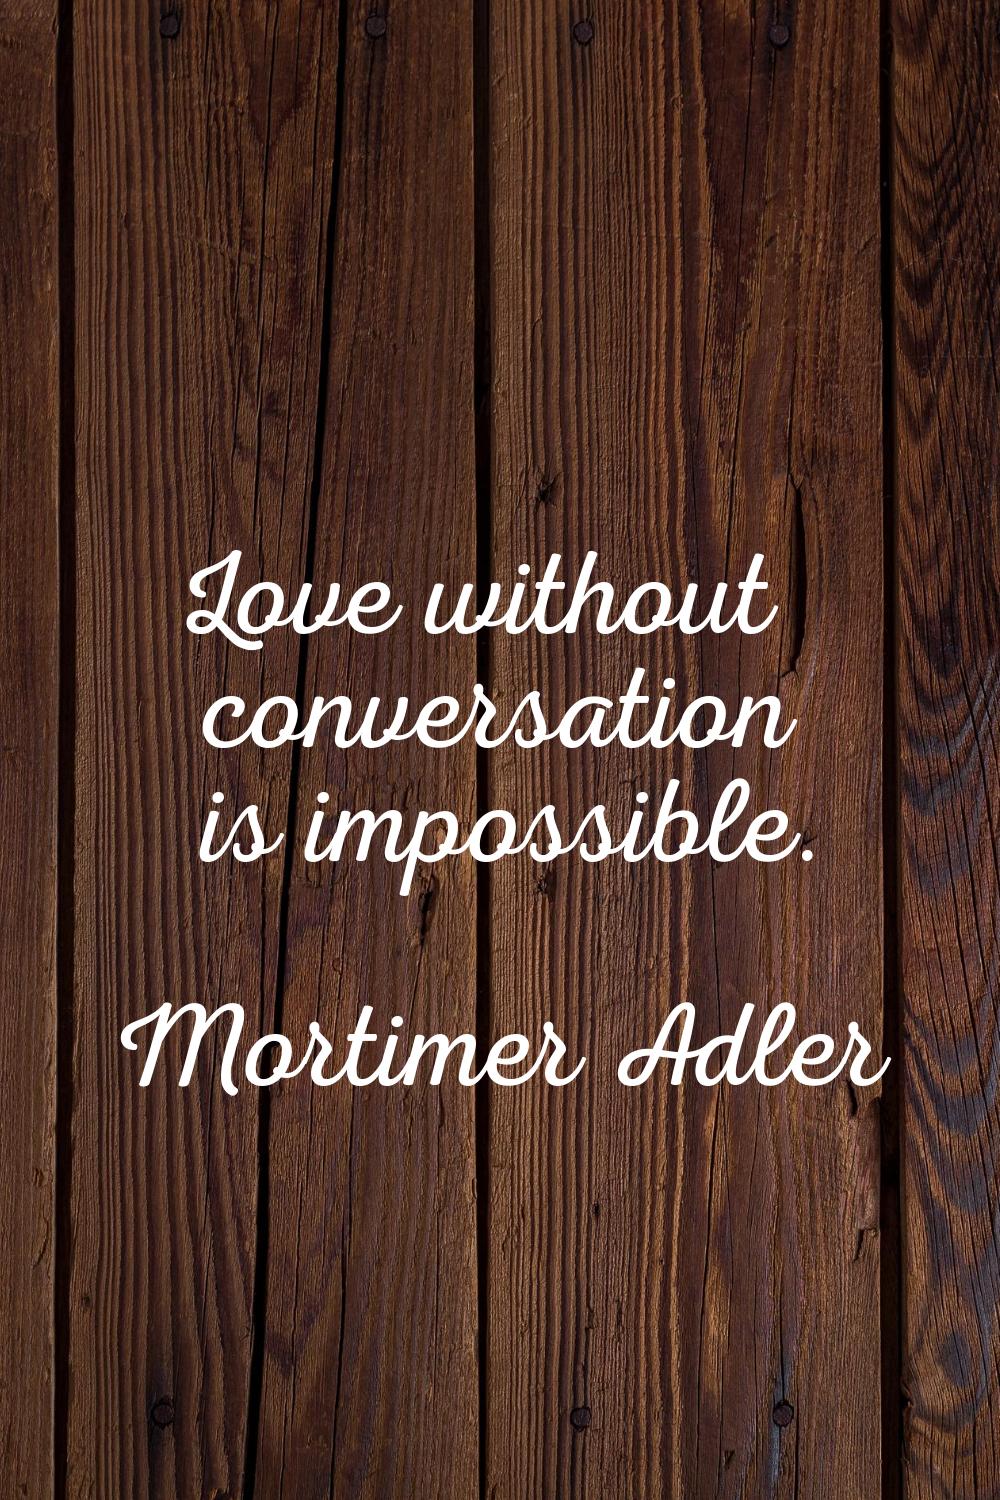 Love without conversation is impossible.